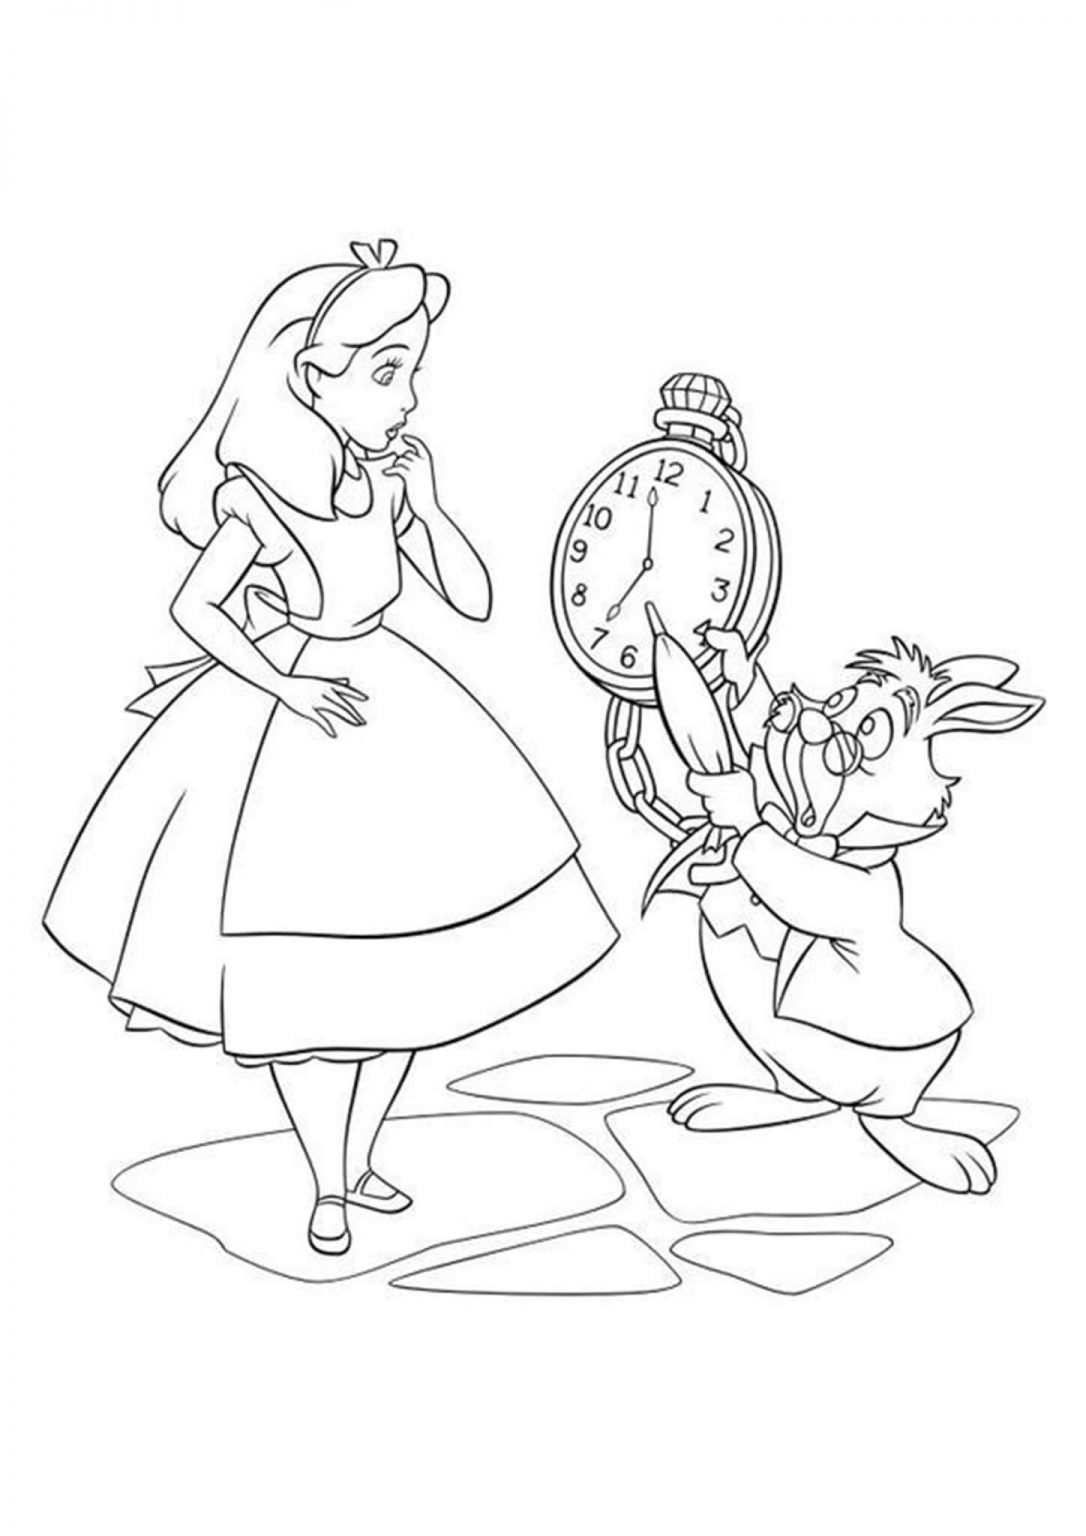 free-easy-to-print-alice-in-wonderland-coloring-pages-tulamama